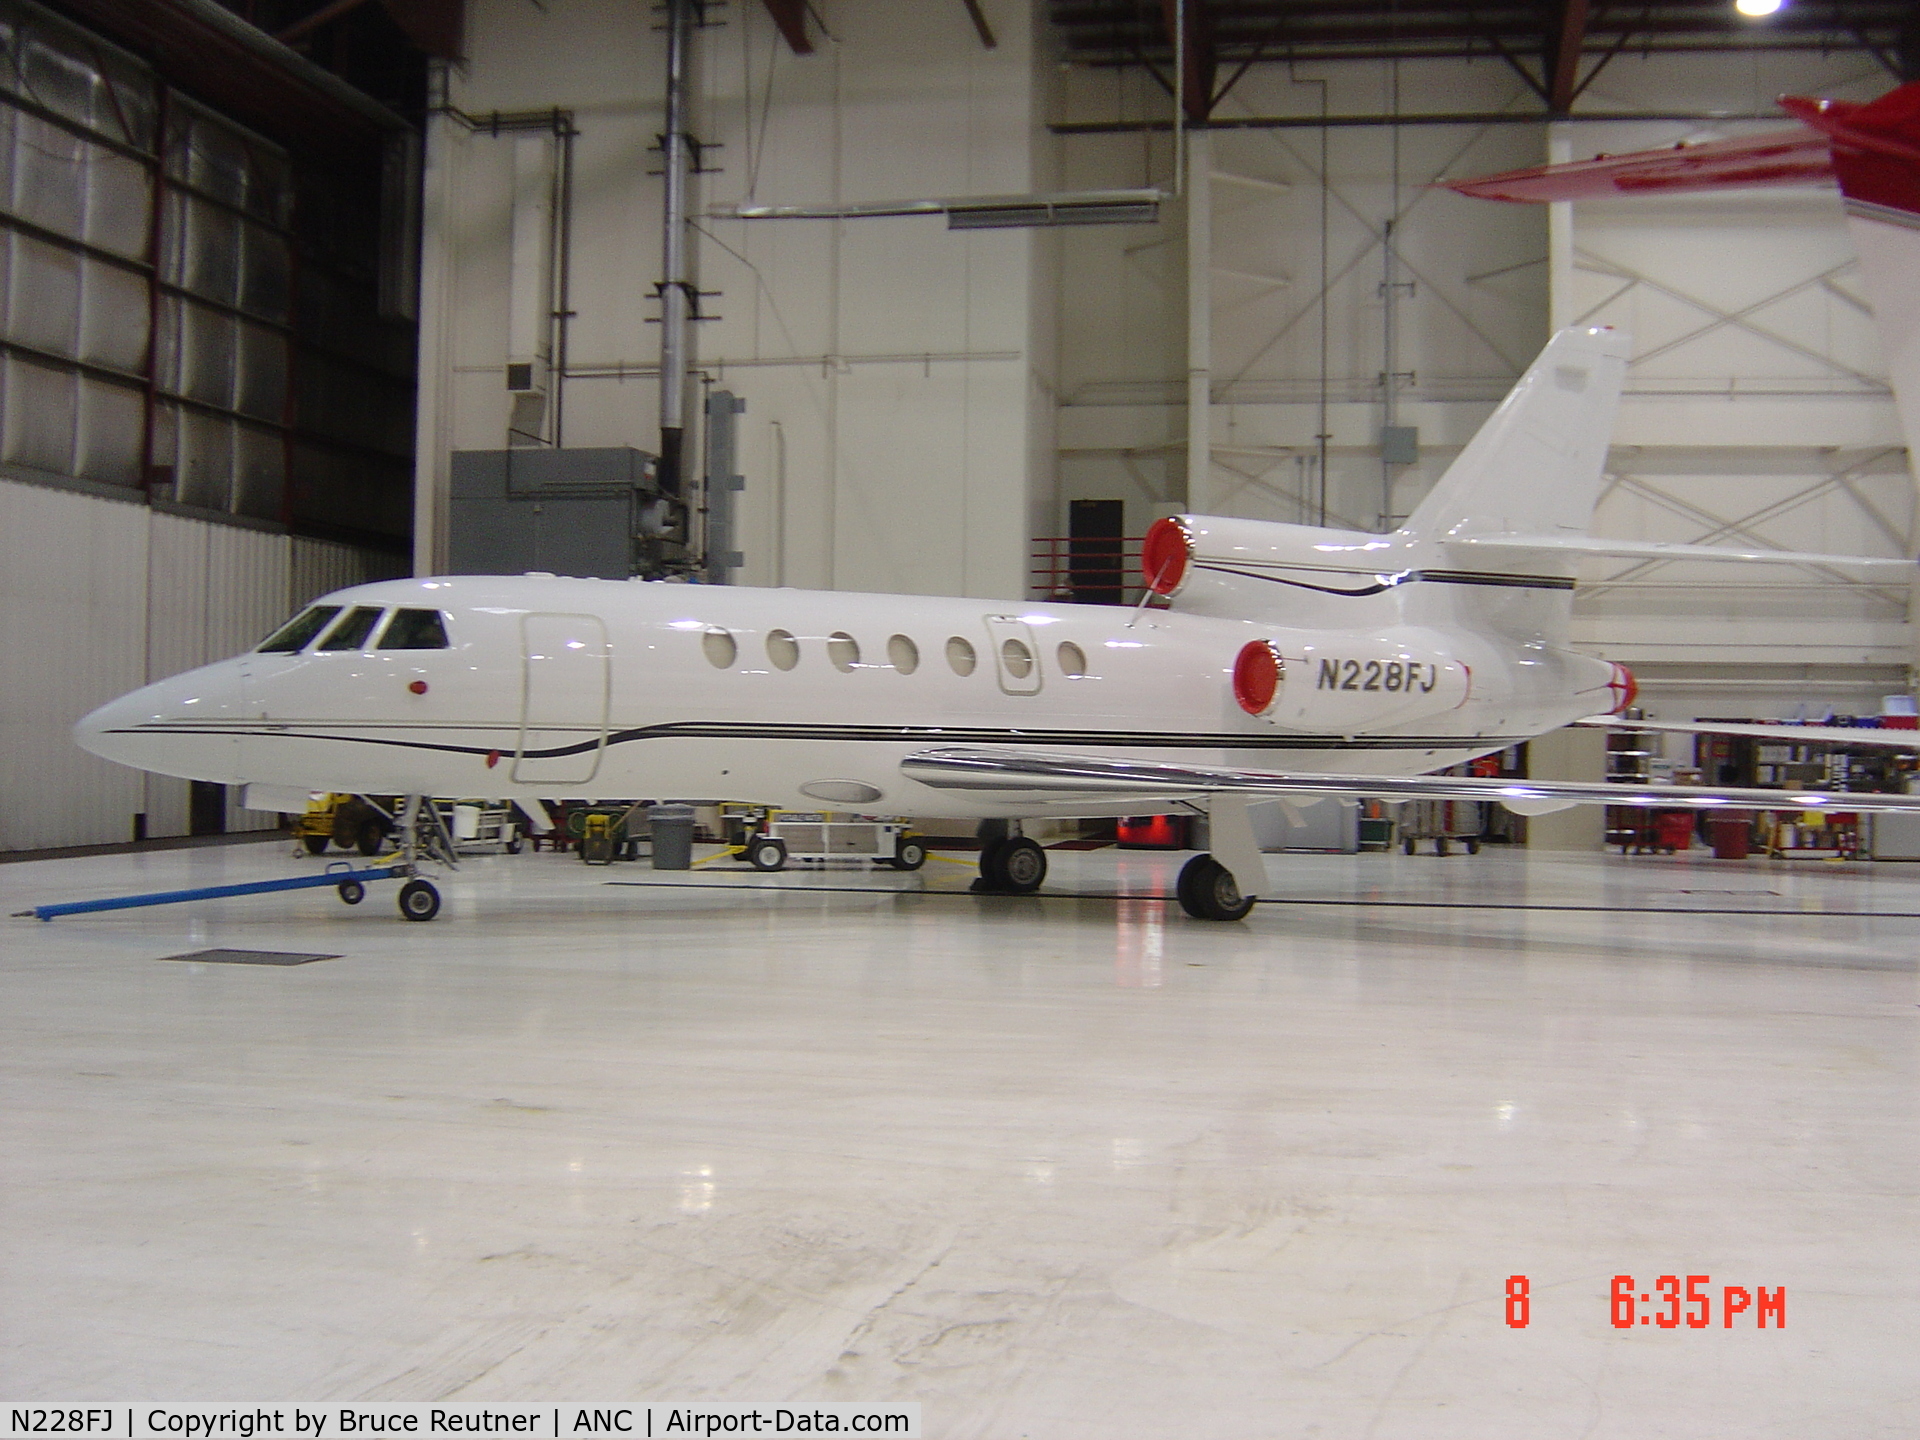 N228FJ, 1992 Dassault Mystere Falcon 50 C/N 228, Falcon 50EX Owned by Reverend Billy Graham Ministrie